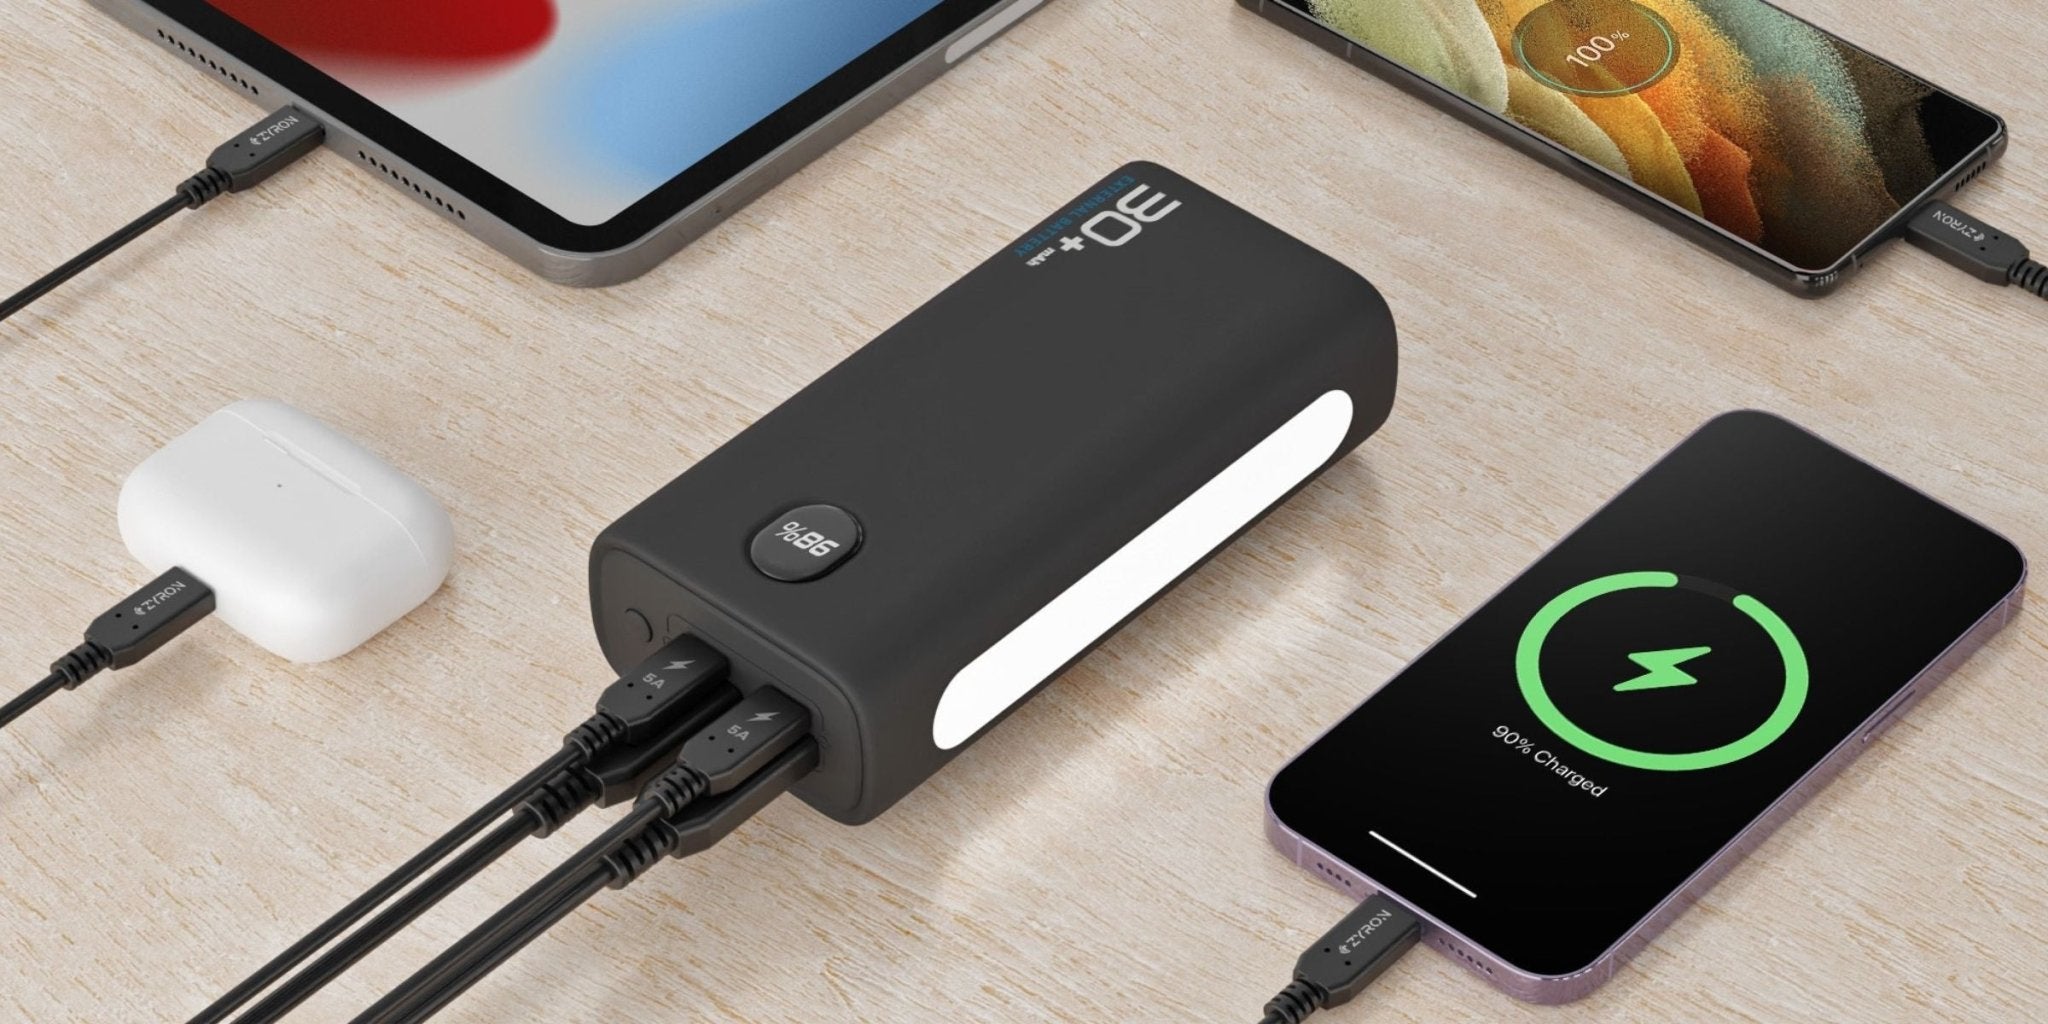 Guide to Choosing the Best Portable Charger for Your iPhone